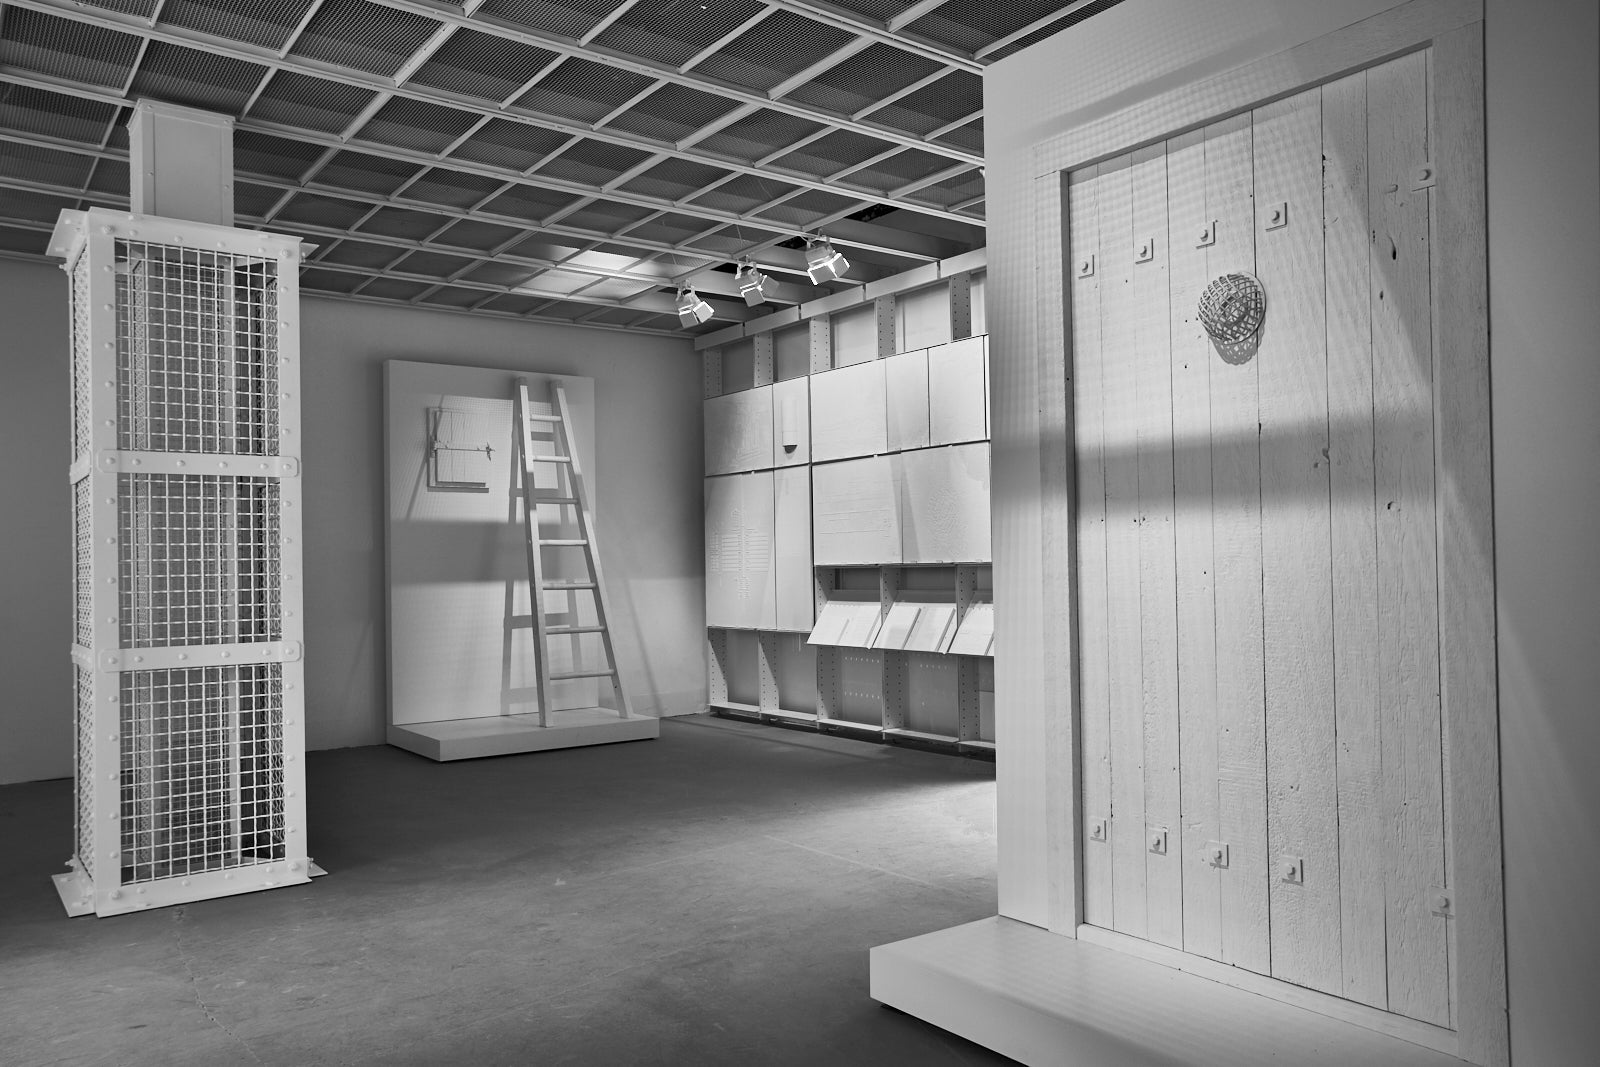 Evidence Room photo by Fred Hunsberger